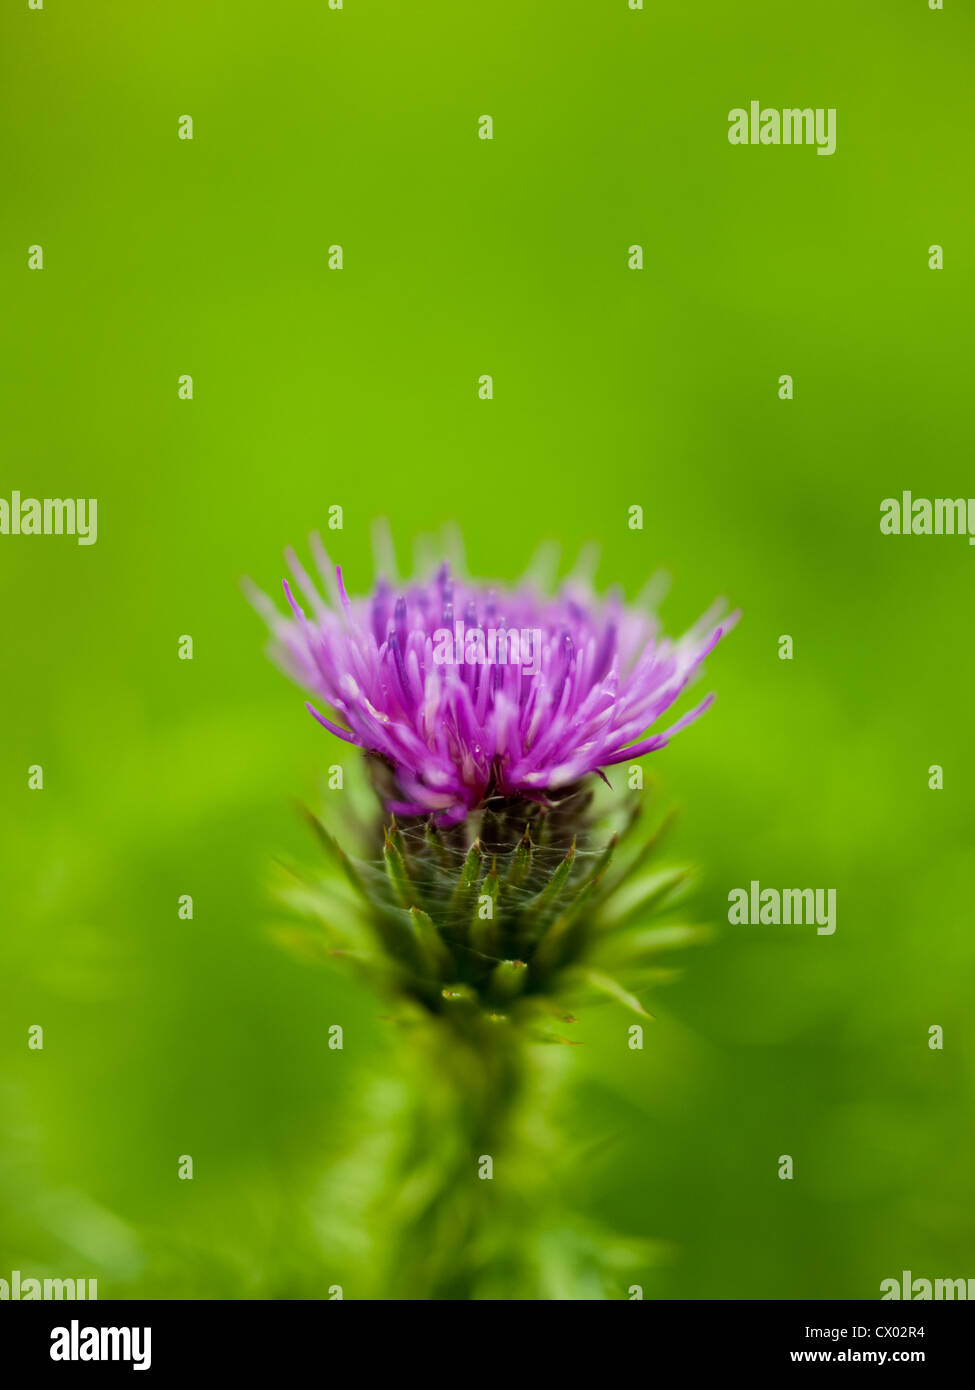 Portrait macro close up of thistle flower Carduus crispus, the Welted Thistle, on blurred green background. Stock Photo